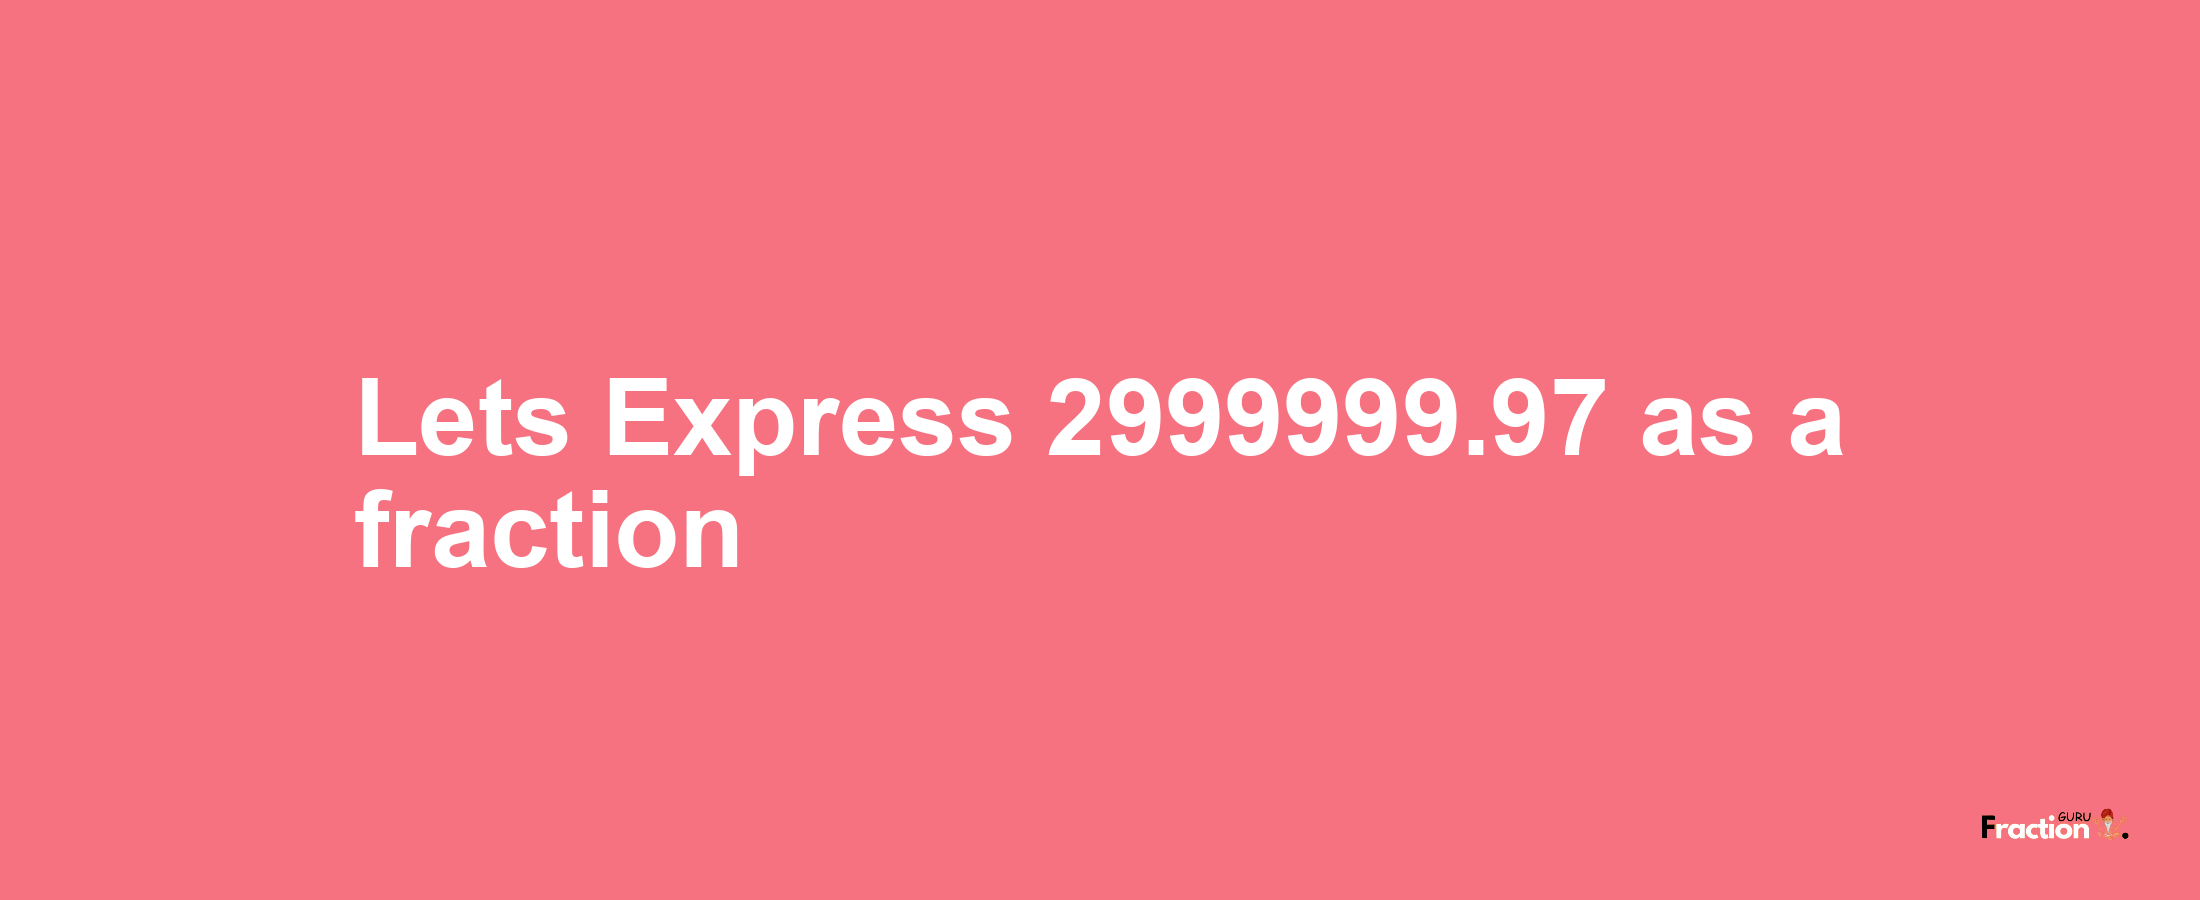 Lets Express 2999999.97 as afraction